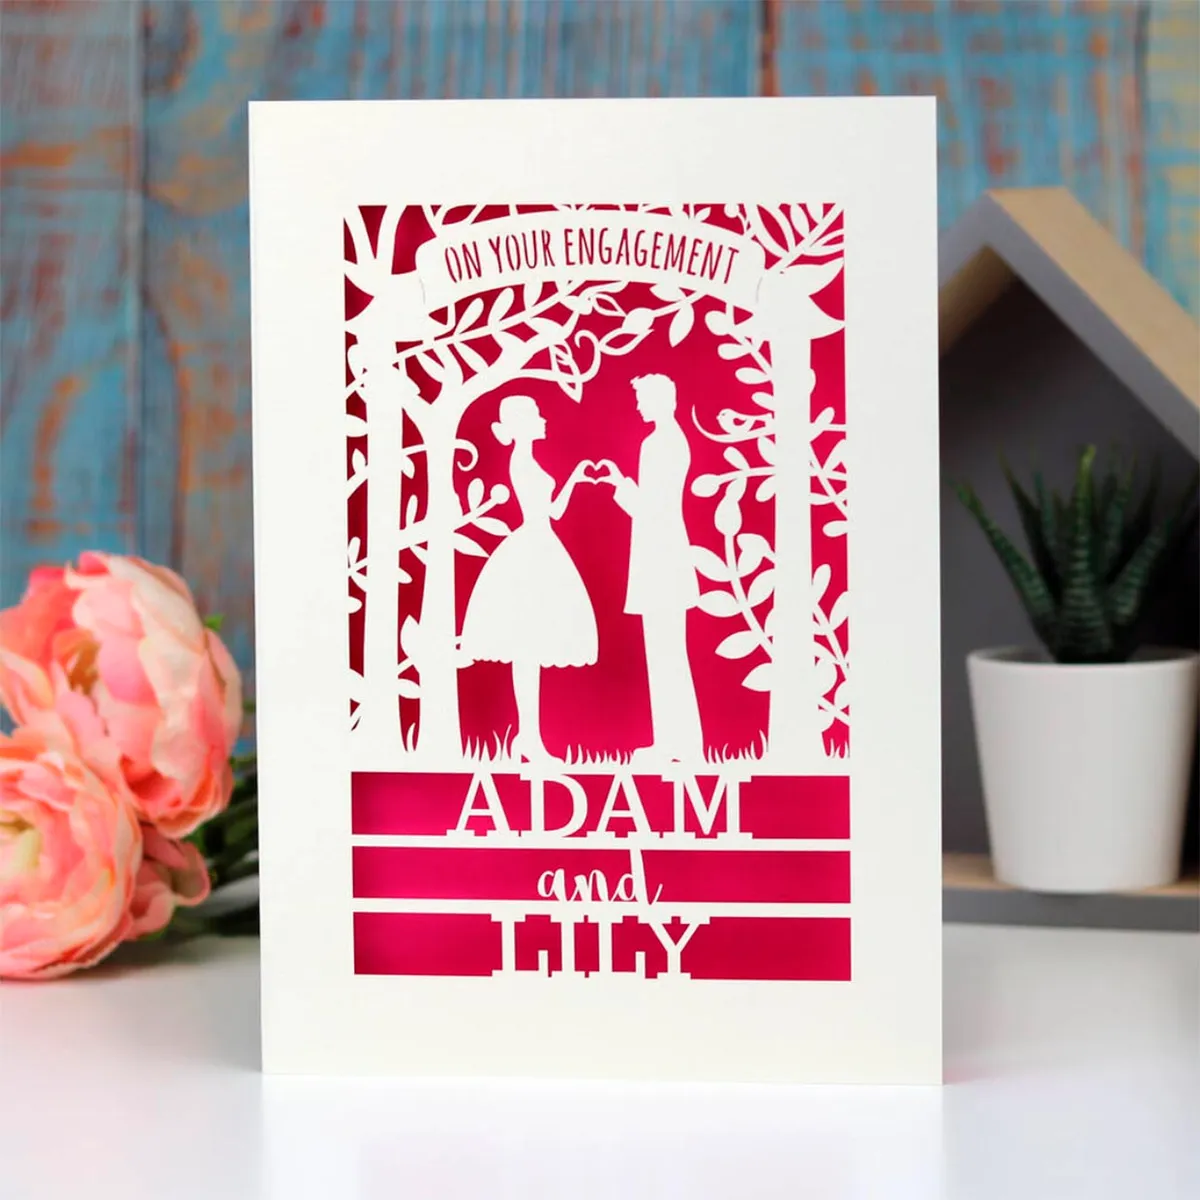 Papercut engagement card from Not on the High Street